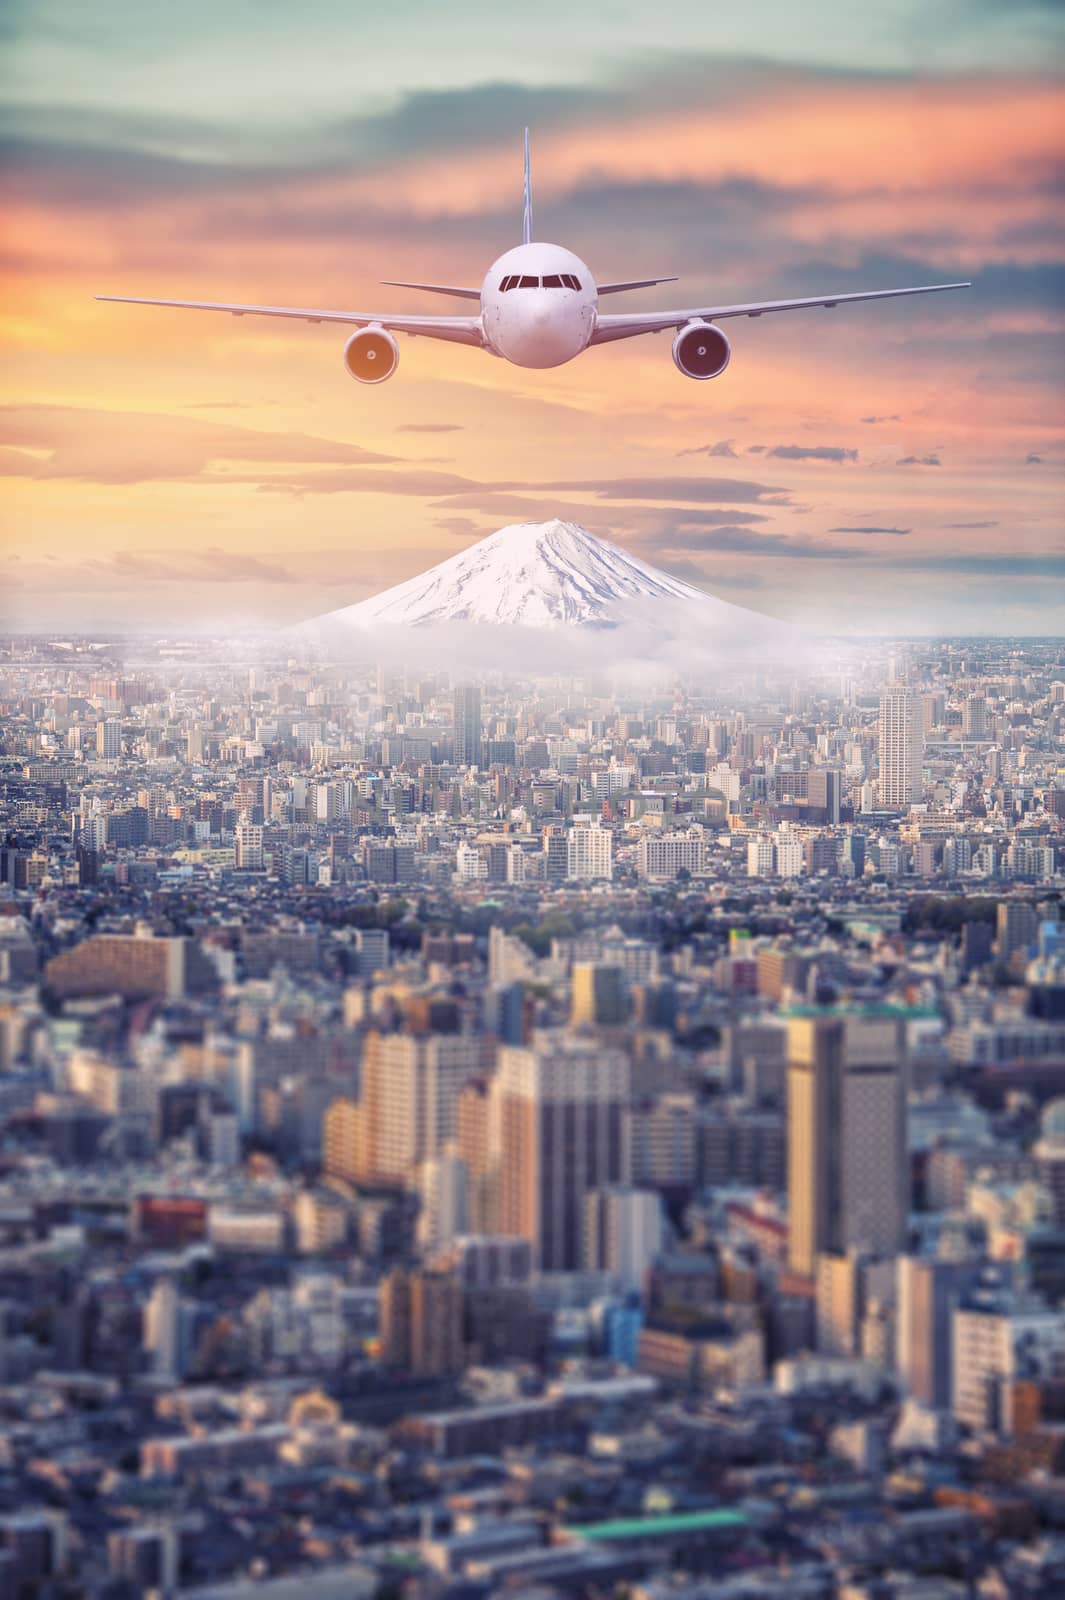 Retouch Mt.Fuji covered with snow and Japan cityscape with airplane on the sky in twilight 